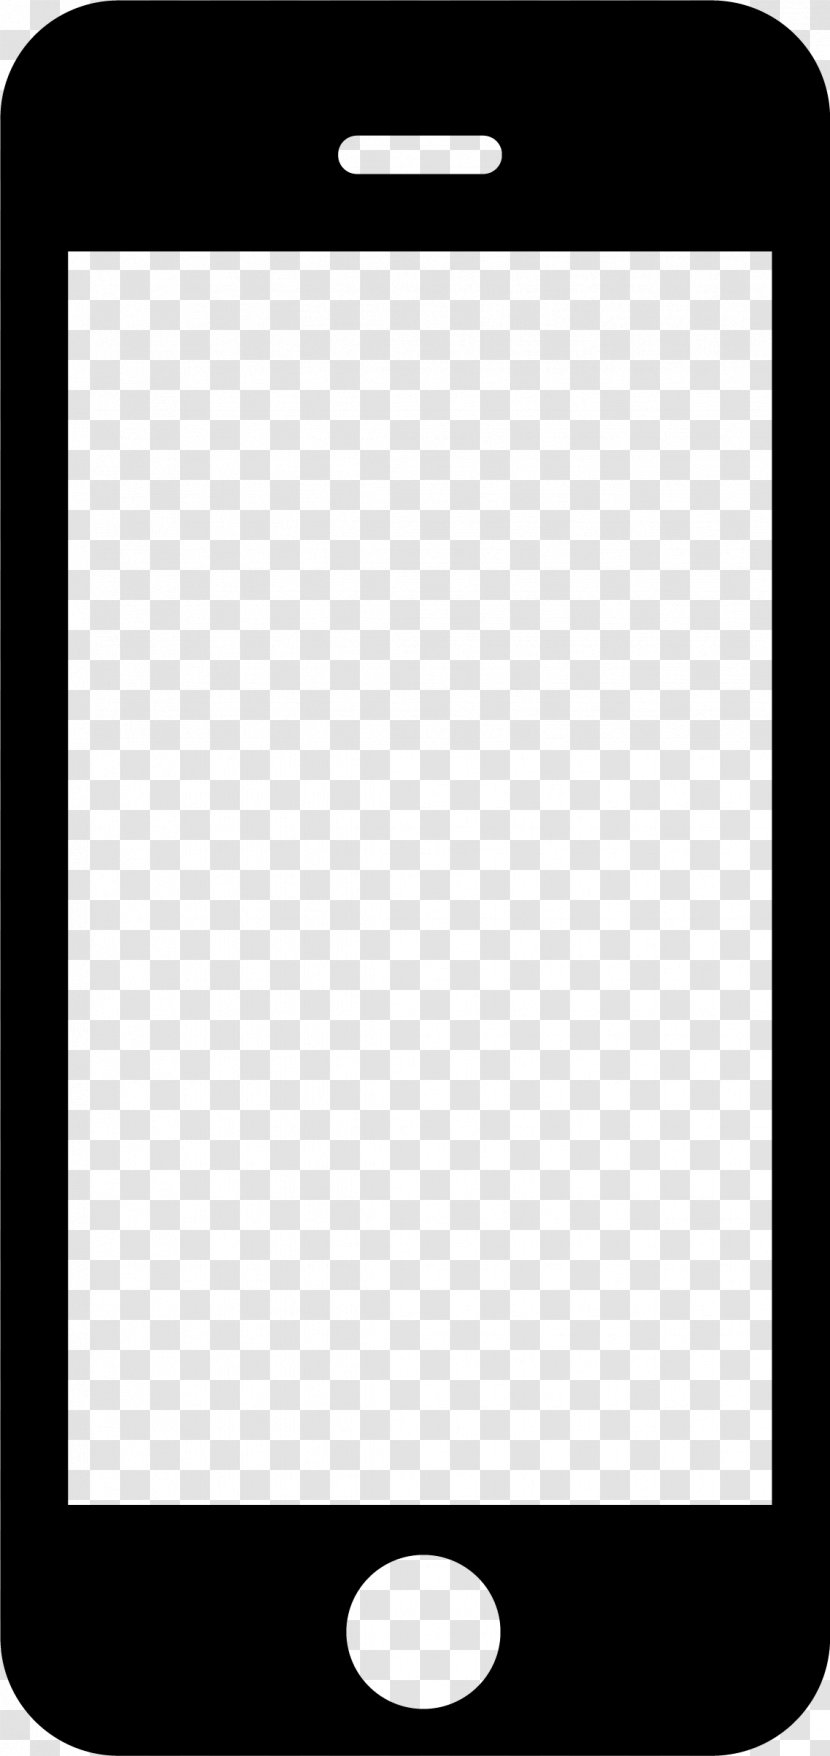 Mobile Phone Text Messaging Pattern - IPhone8边框 Transparent PNG